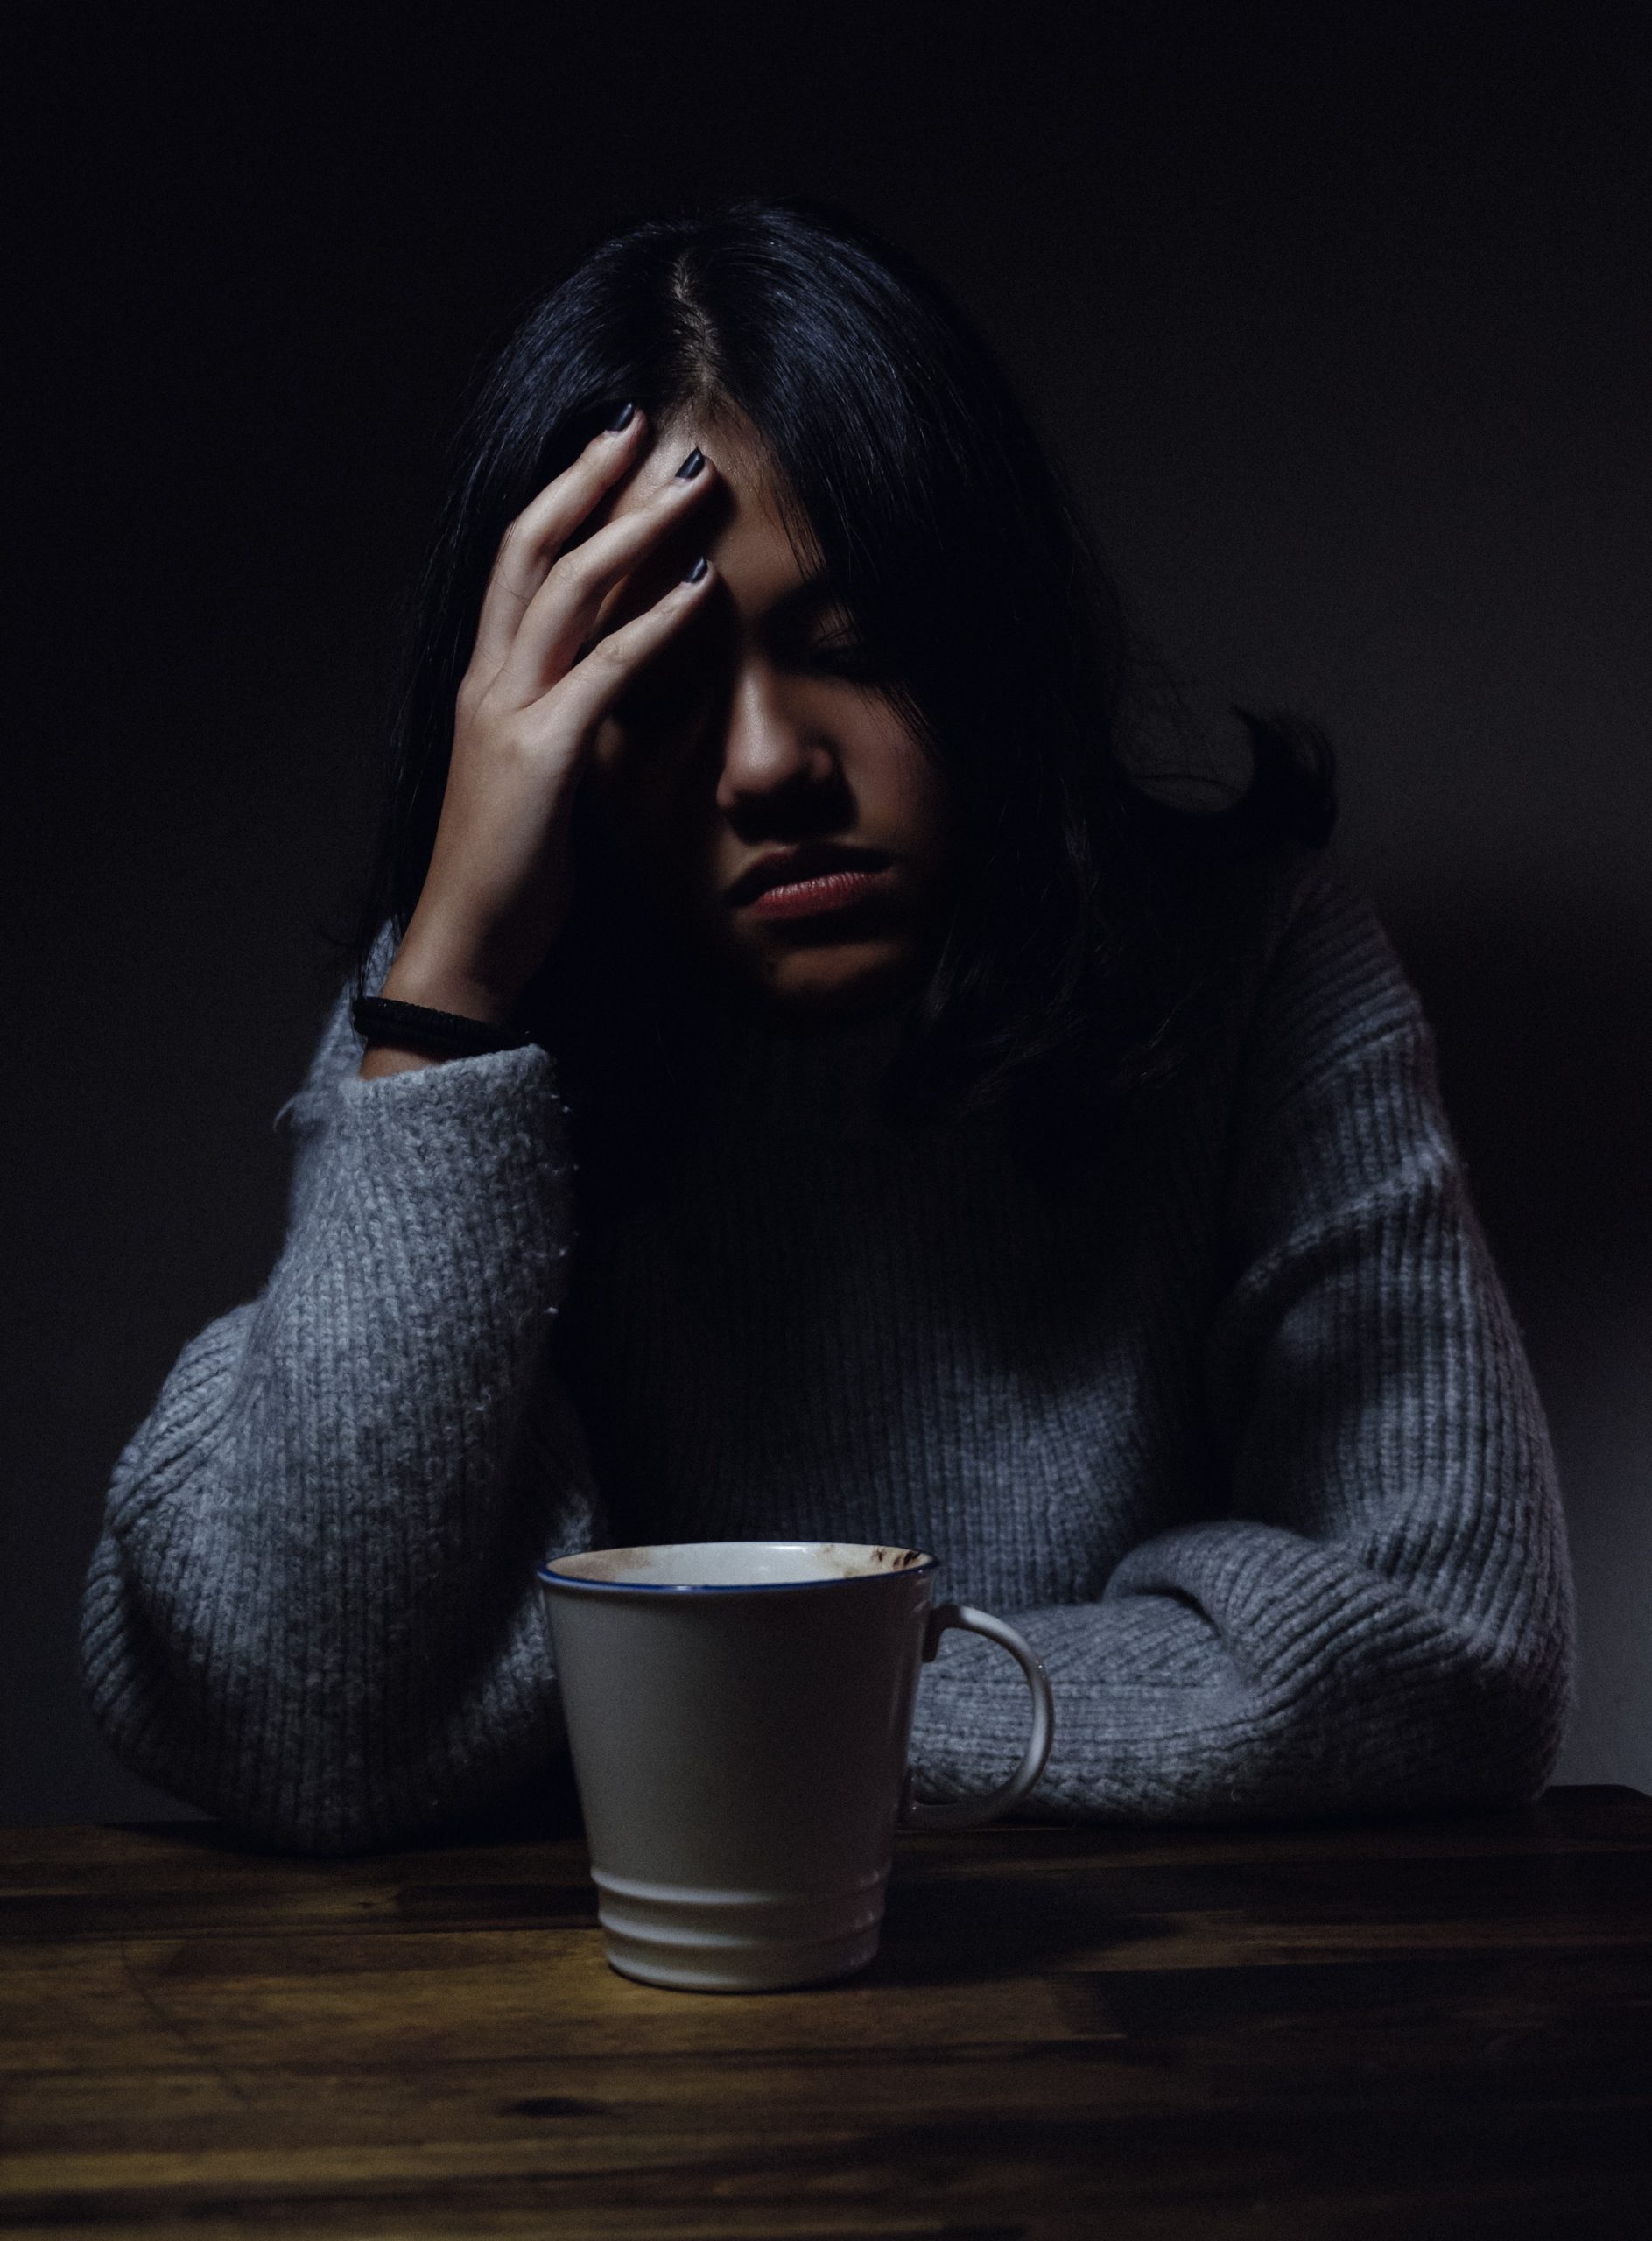 A young woman sits in a dark room with her head in her hands. She is leaning on a wooden table with a coffee mug in front of her.